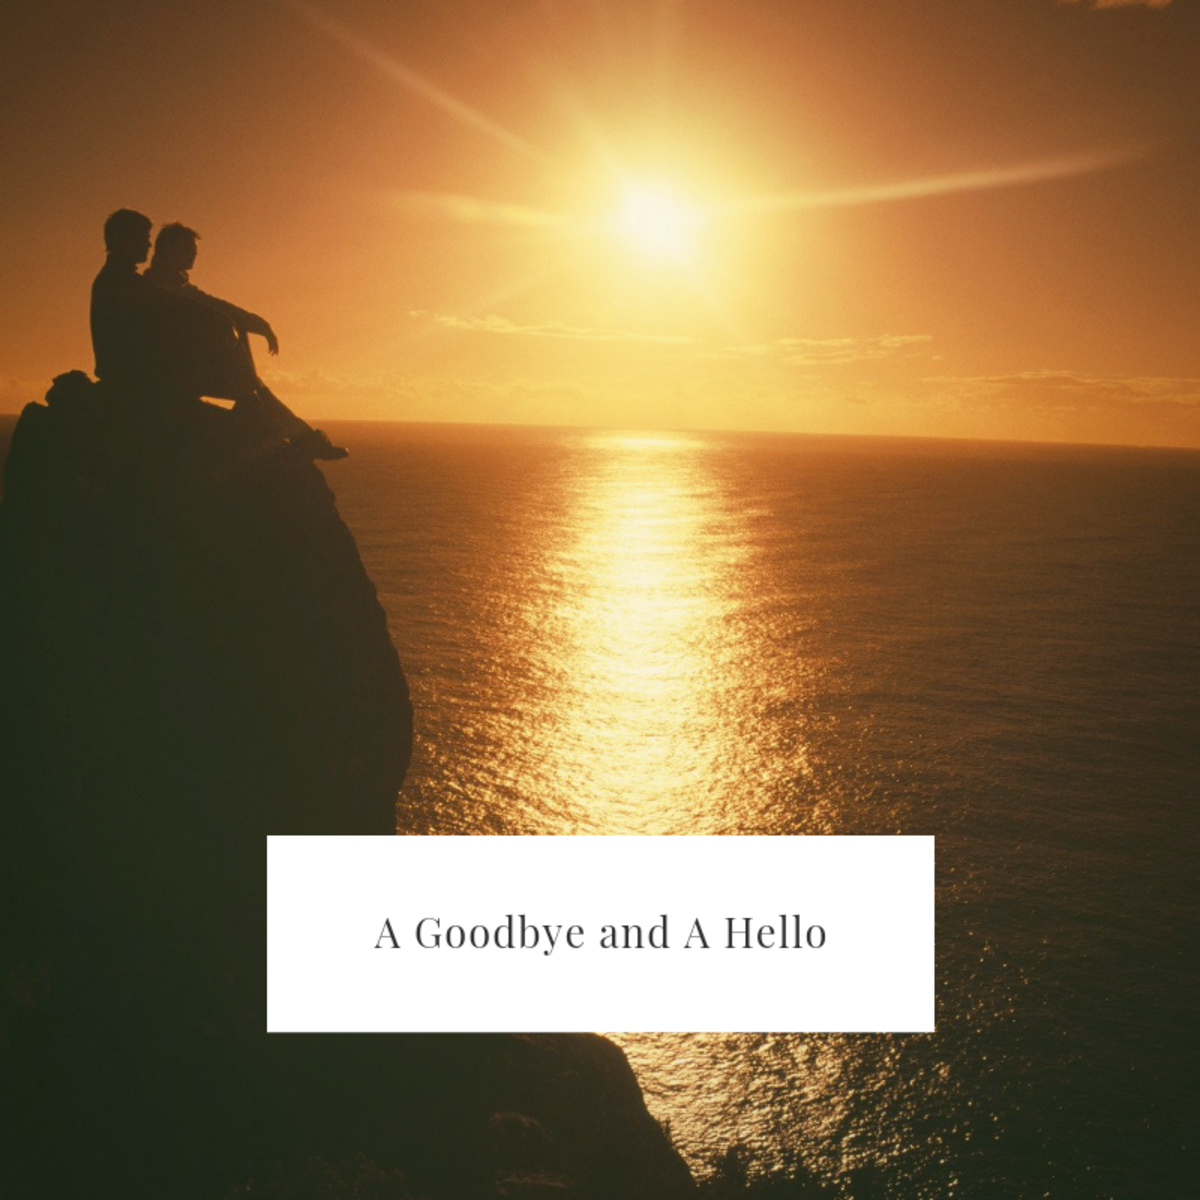 A Goodbye and a Hello